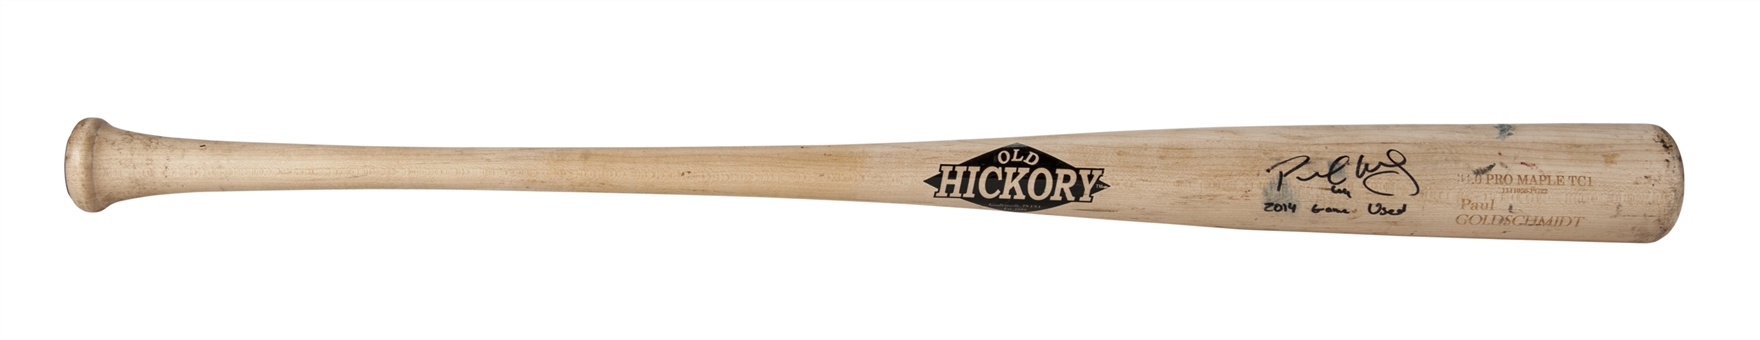 2014 Paul Goldschmidt Game Used and Signed Old Hickory Bat (PSA/DNA, MLB Authenticated)